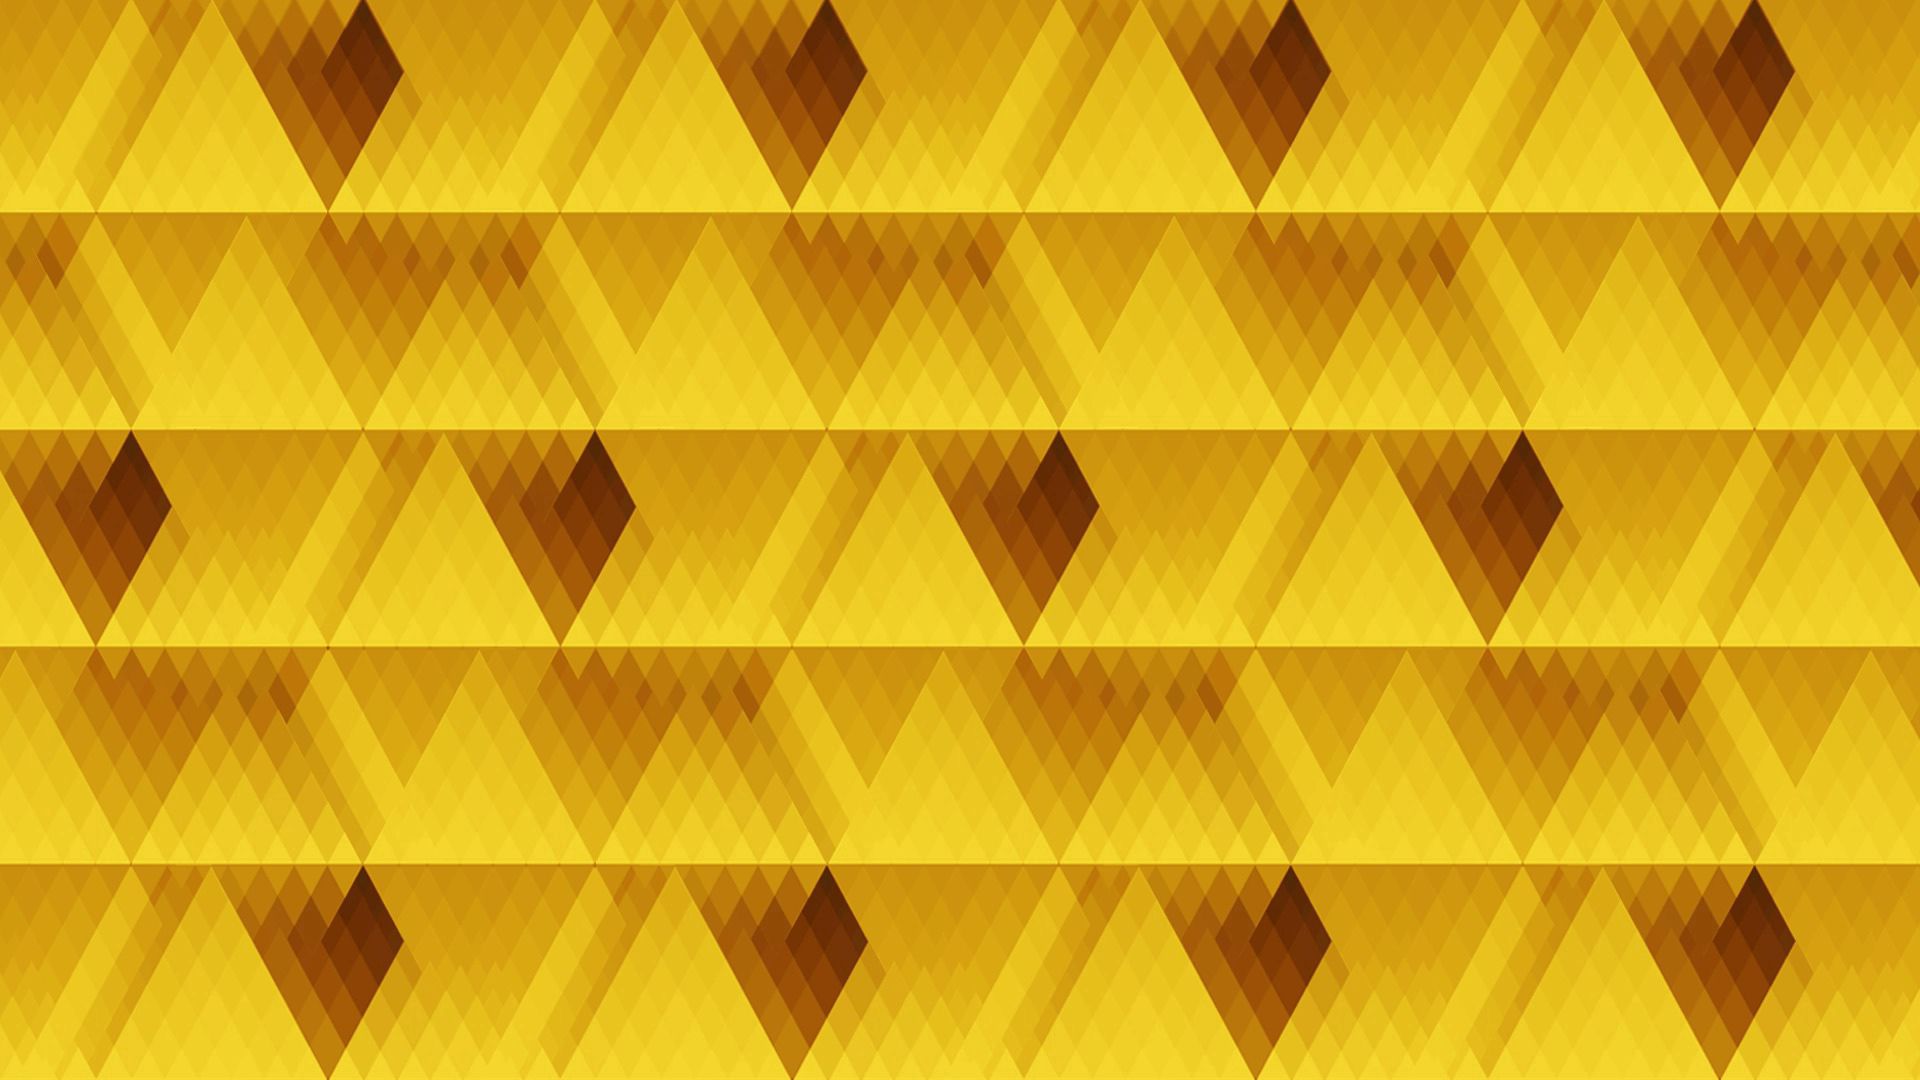 82542 download wallpaper textures, yellow, texture, lines, rhombus screensavers and pictures for free